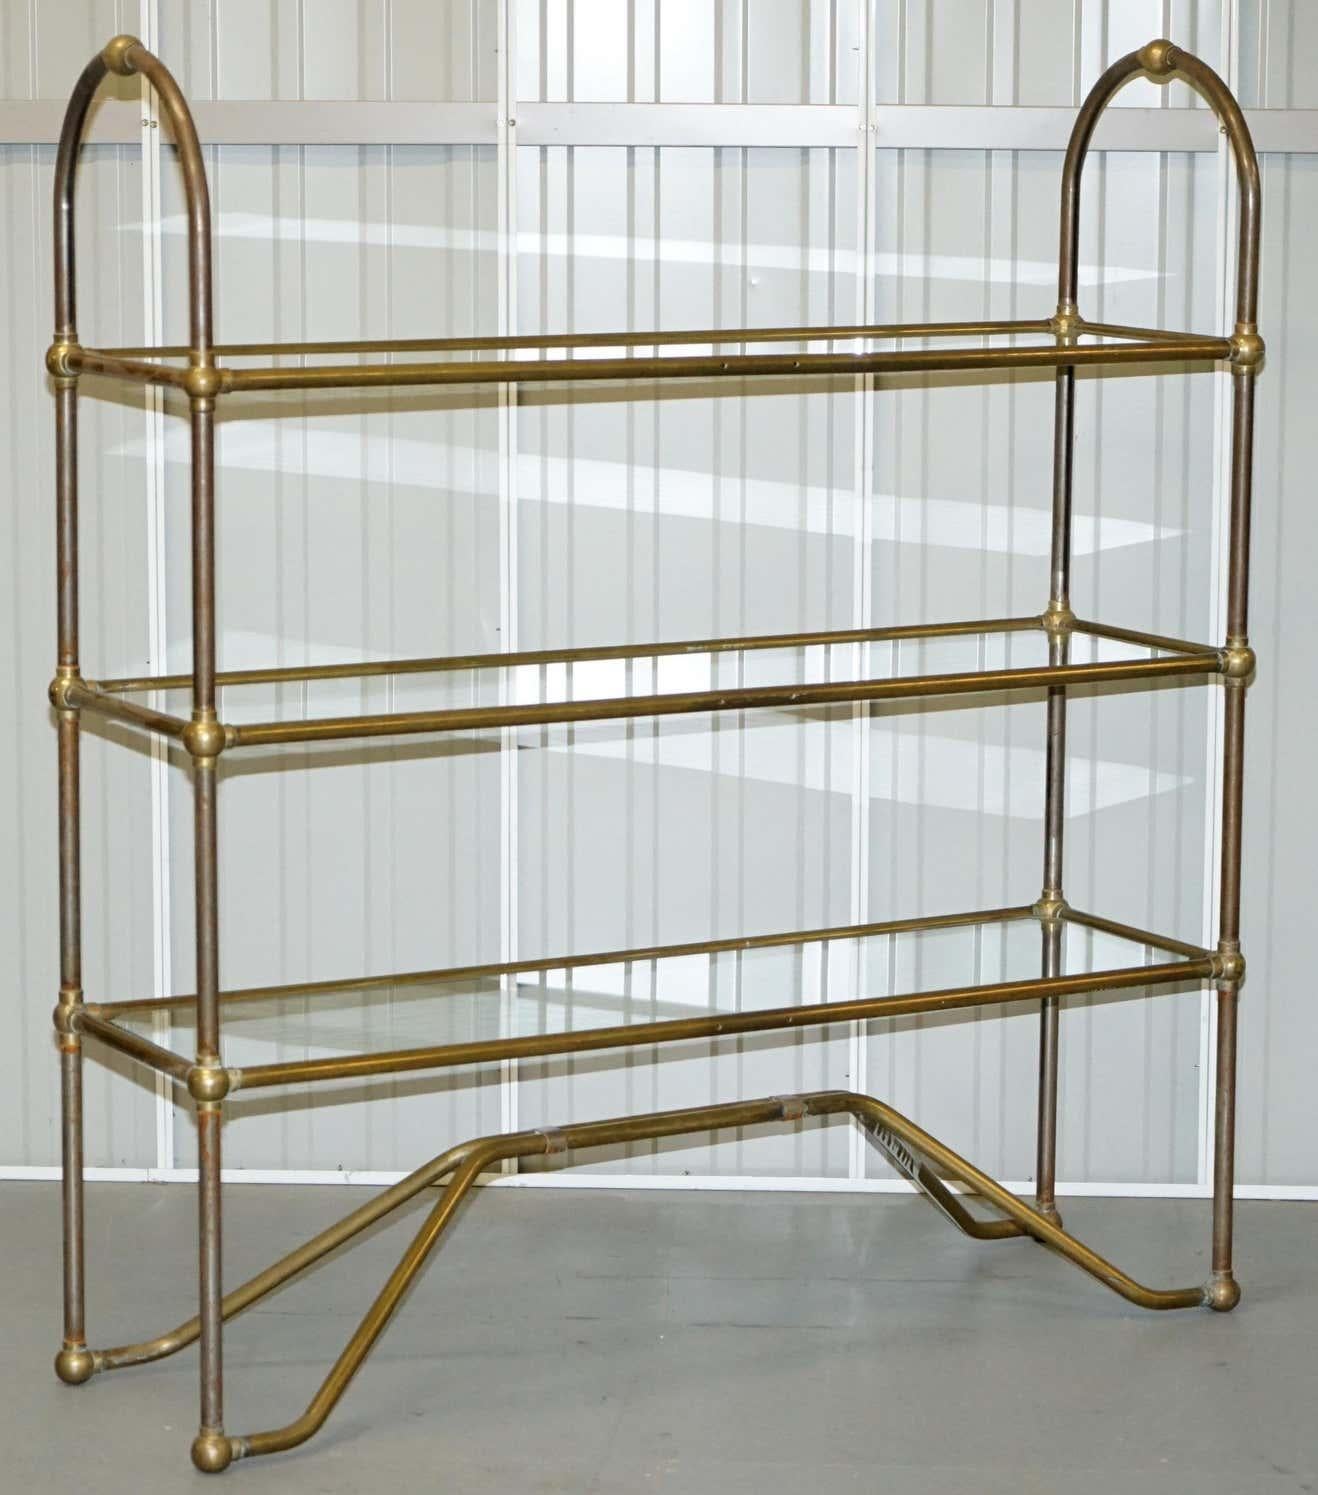 We are delighted to offer 1 of 4 exceedingly rare original 1930’s Art Deco Bronze and Steel Liberty’s of London display racks which are part of a larger suite

This sale is for one piece with the option to buy four of this size, I also have two